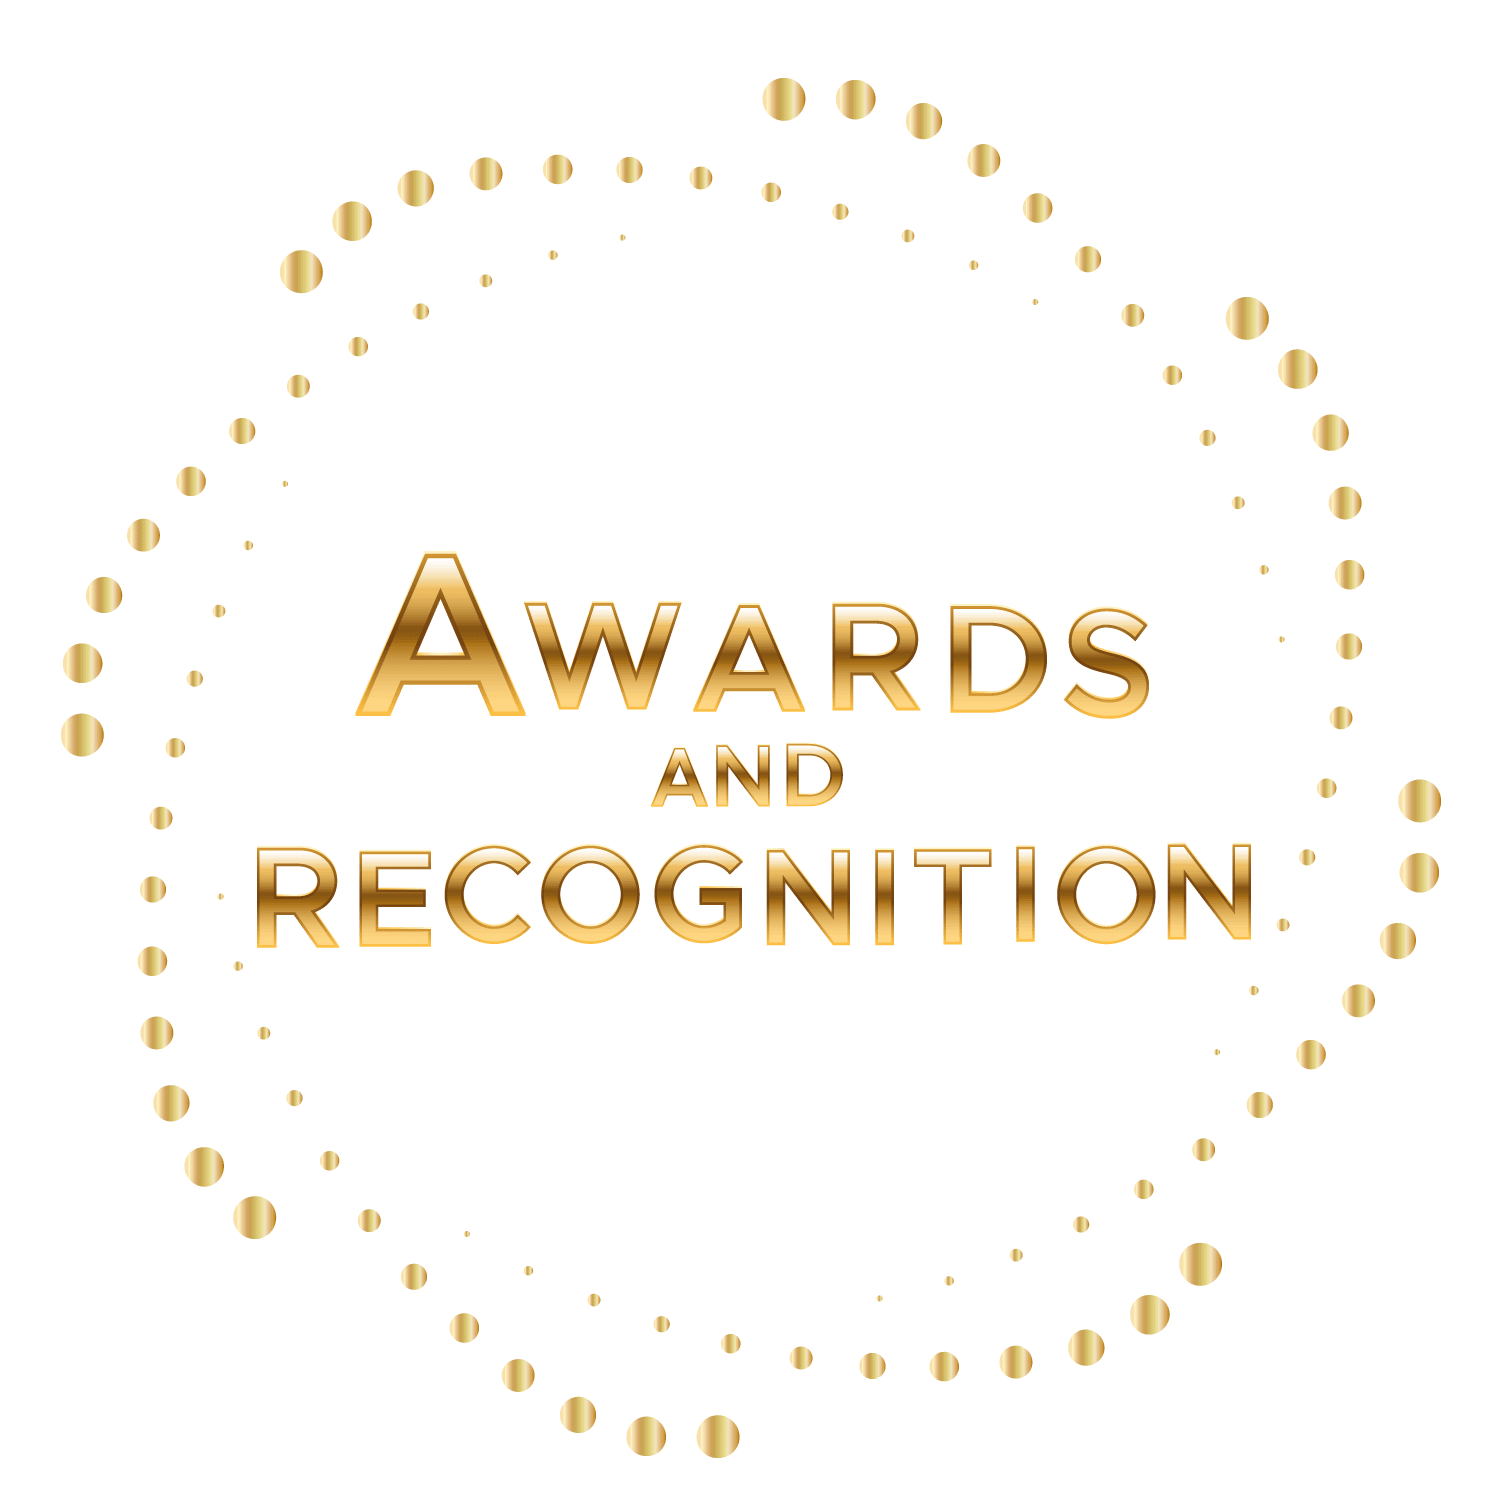 Awards and Recognition in Meeting and Events